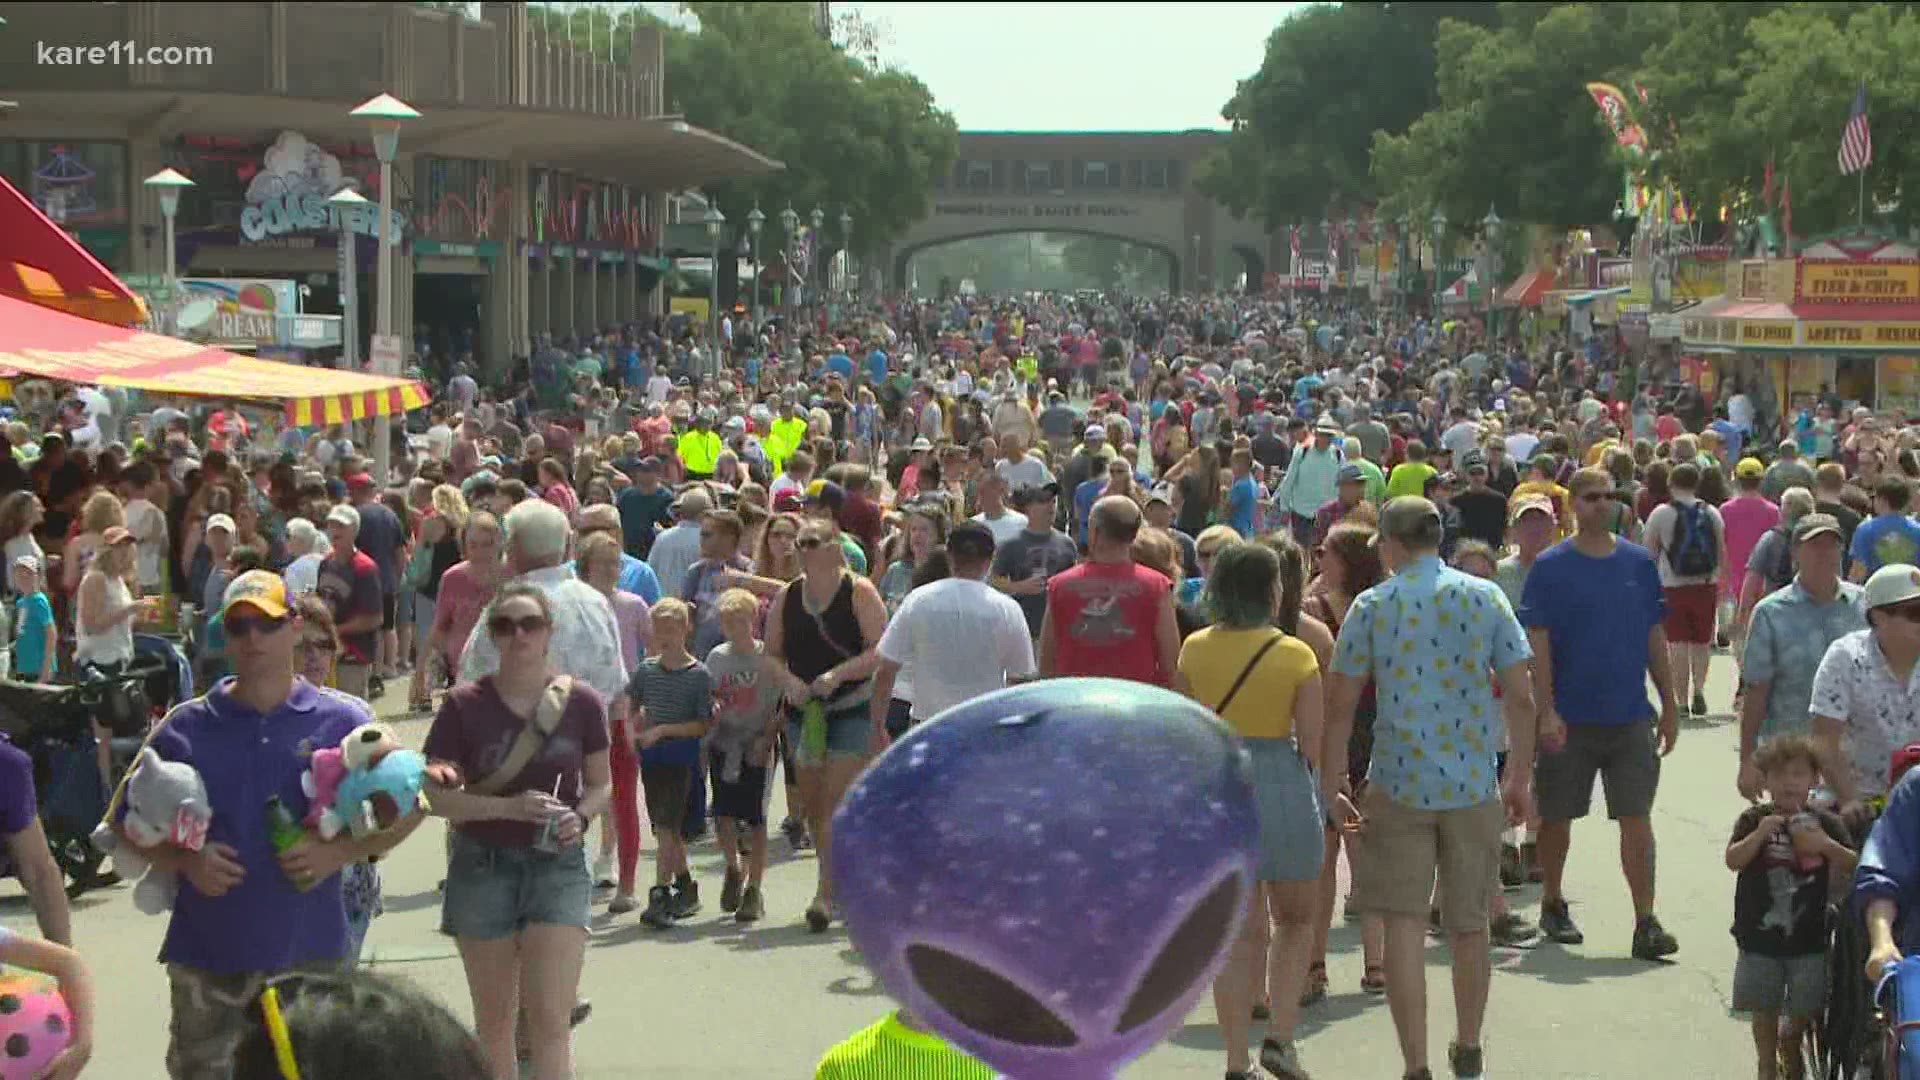 Minnesota State Fair moves ahead with 2021 plans